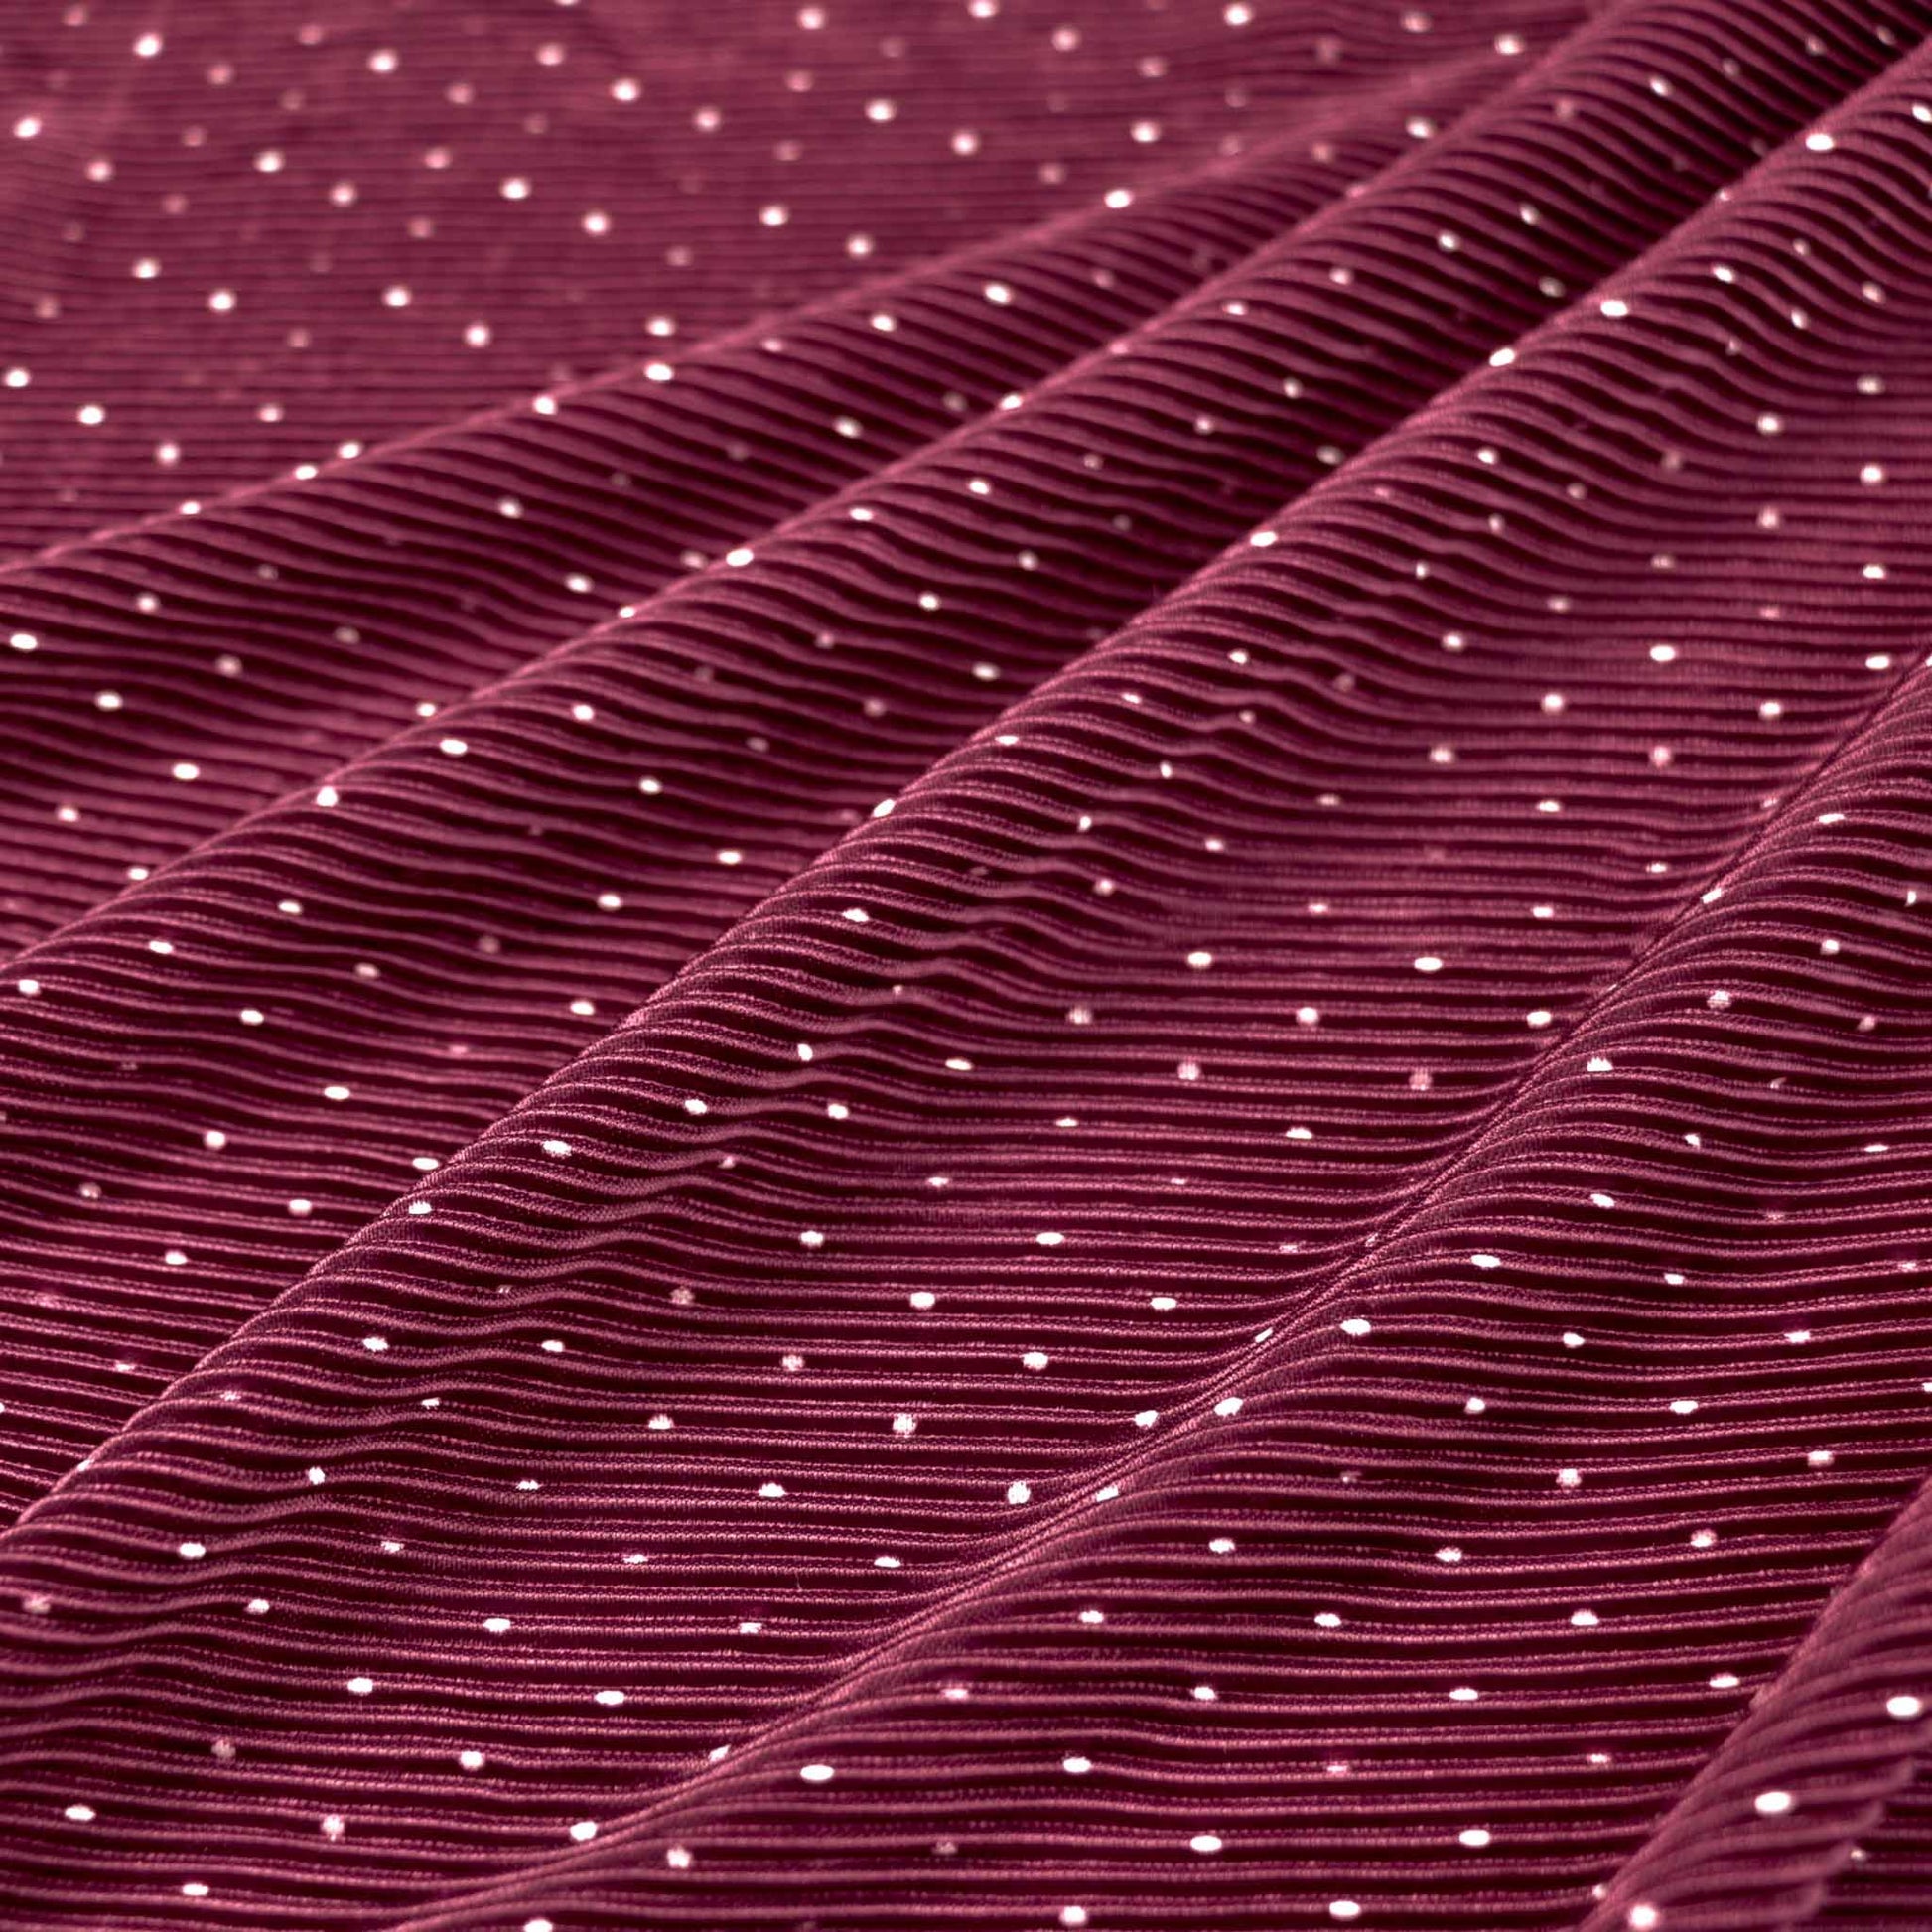 shimmer maroon plisse dressmaking fabric with pleated texture and white polka dot design